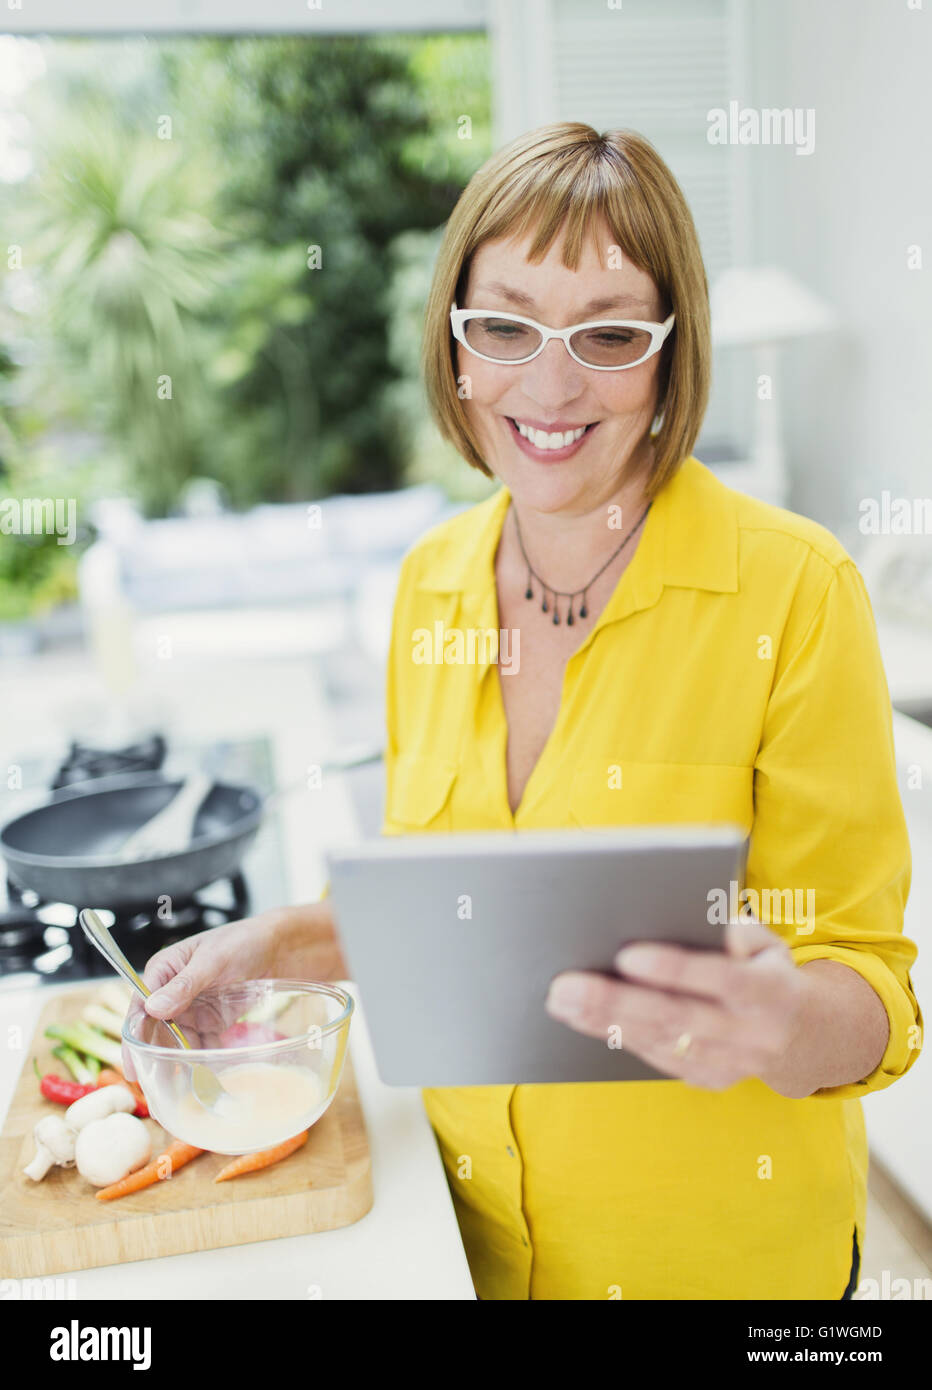 Smiling mature woman using digital tablet and cooking in kitchen Stock Photo